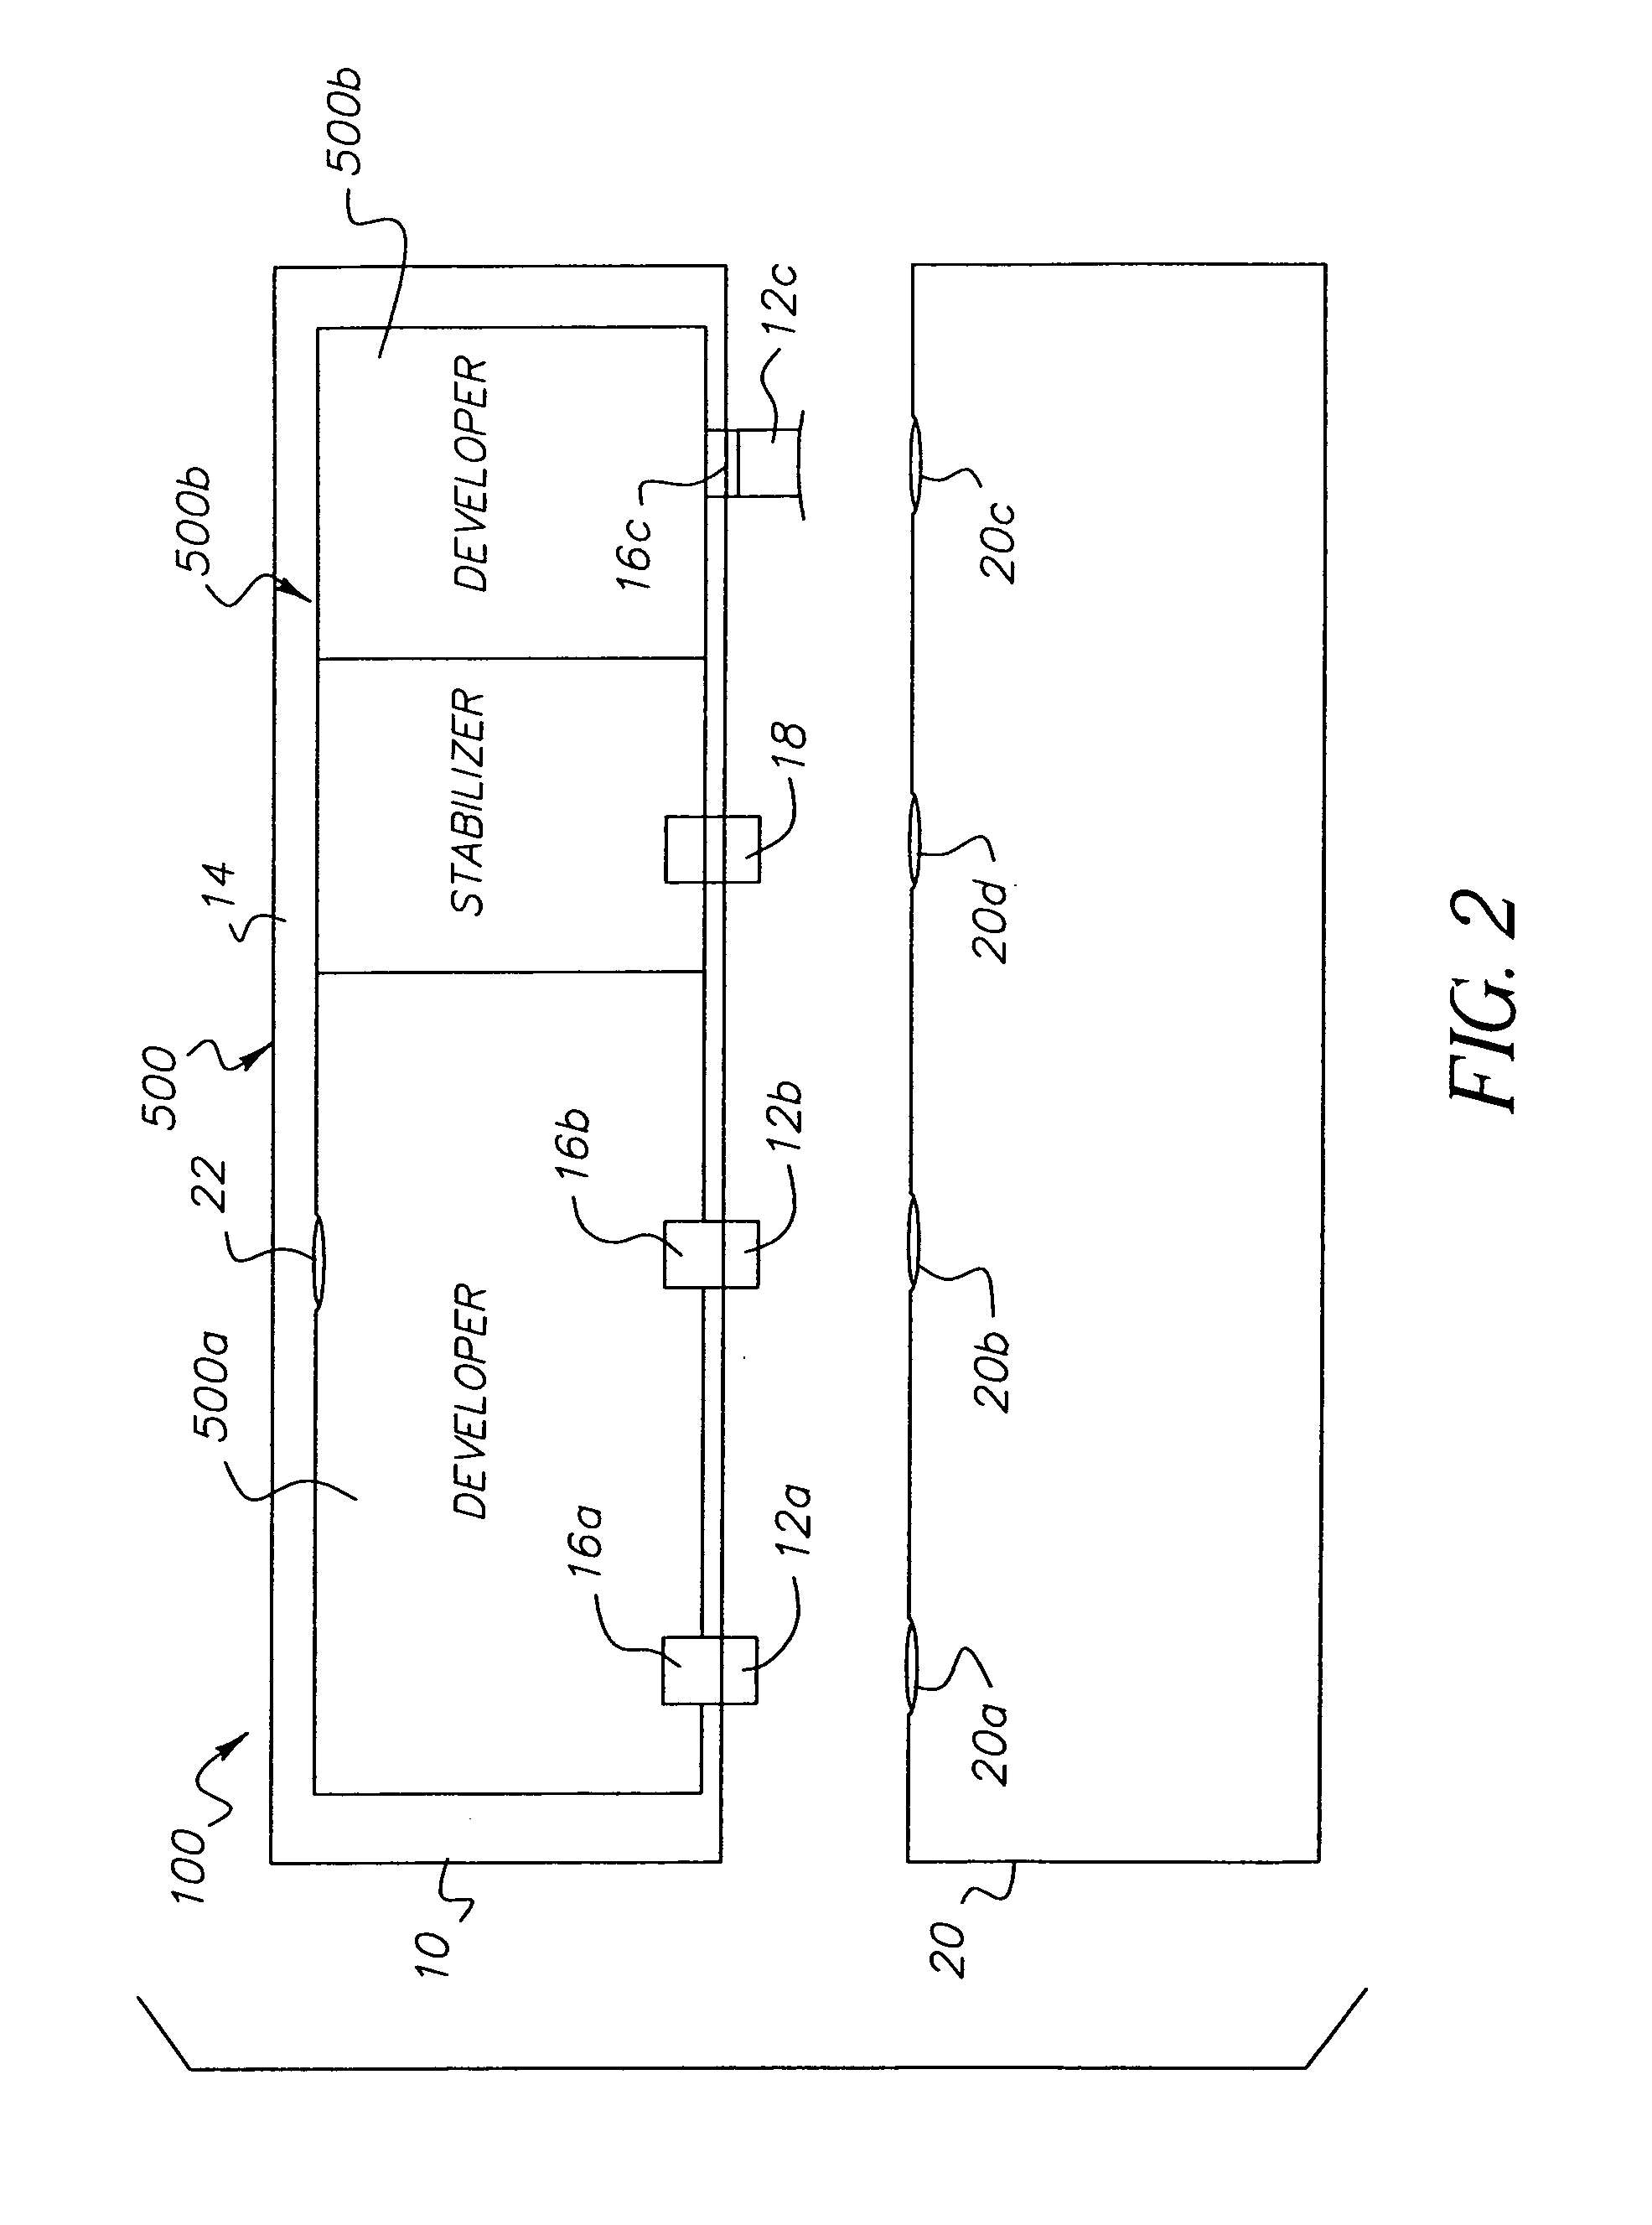 Photographic processing arrangement and a processing solution supply cartridge for the processing arrangement